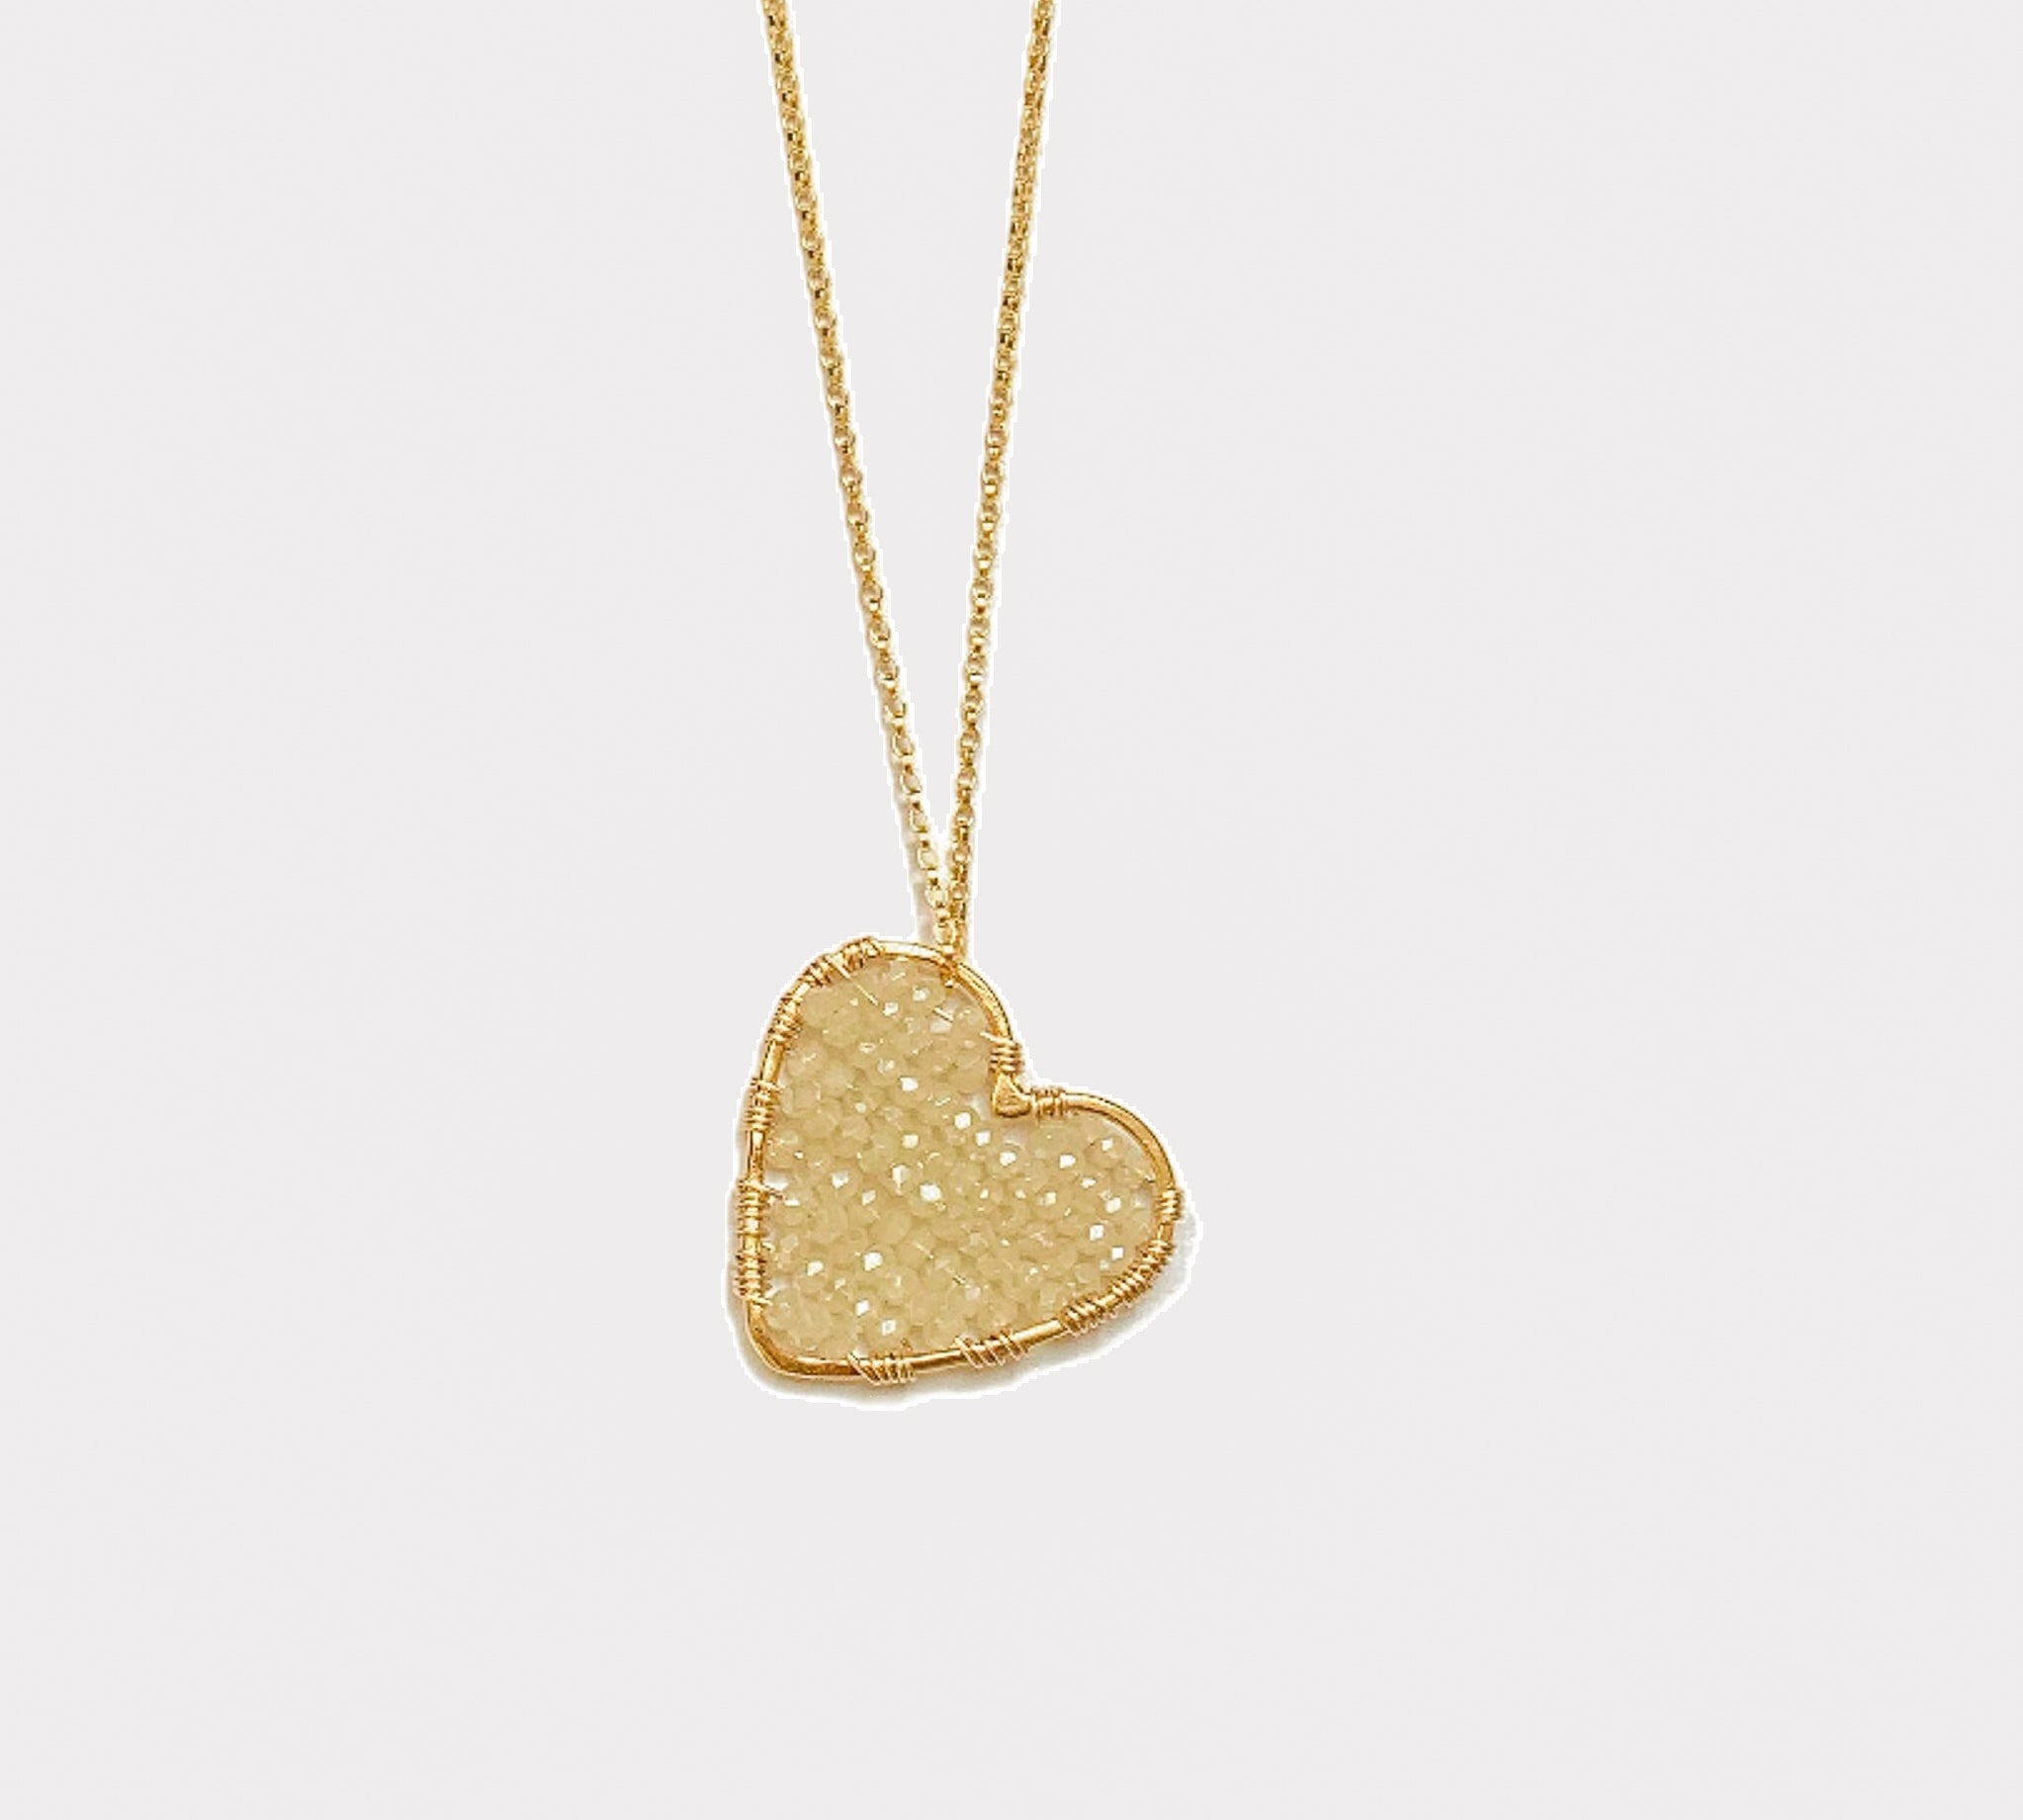 Honey Love Drop Necklace, product image